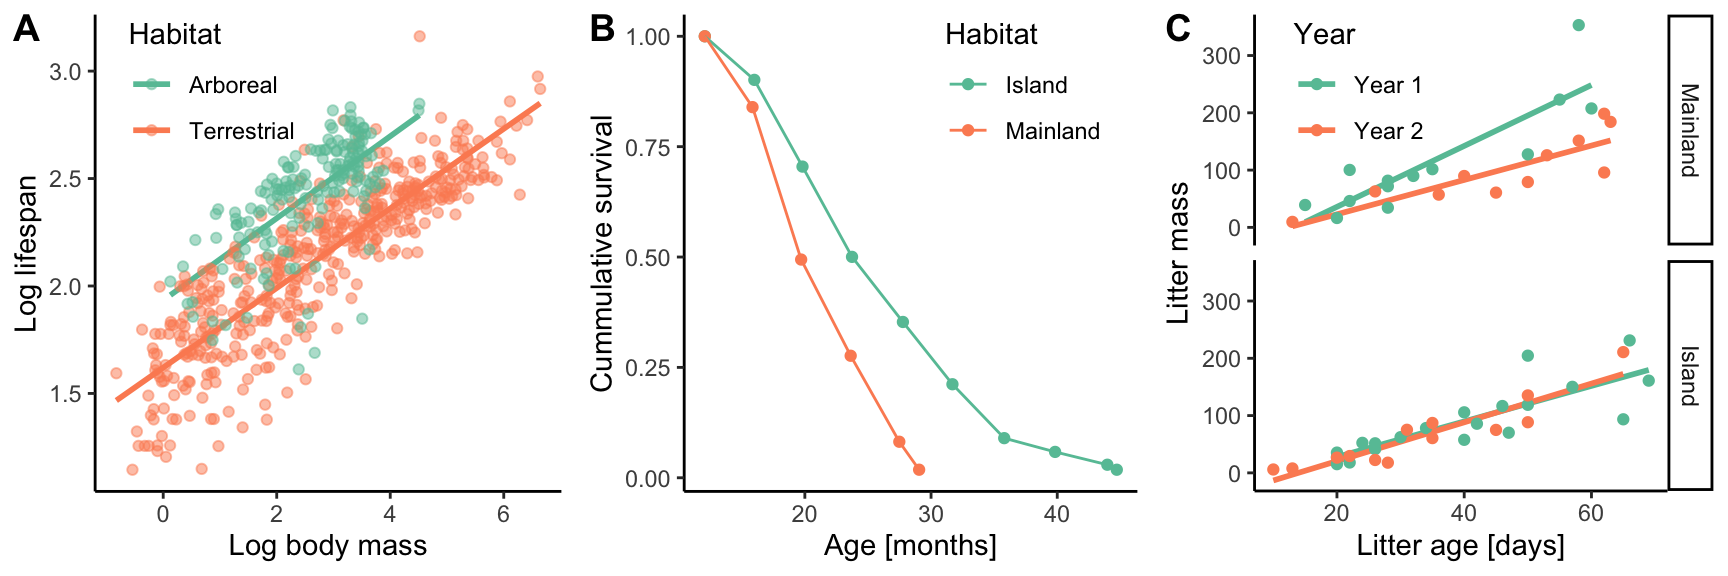 A. Differences in lifespan between arboreal and terrestrial mammals. [Data](data/data/12_arboreal.csv) form Shattuck and Williams (2010). B. Cumulative survival in mainland and island populations of the Virginia opossum (*Didelphis virginiana*). [Data](data/12_possums.csv) form Austad (1993). C. Investment into reproduction of mainland and island opossums in their first and second year of reproduction. [Data](data/12_possrep.csv) form Austad (1993).